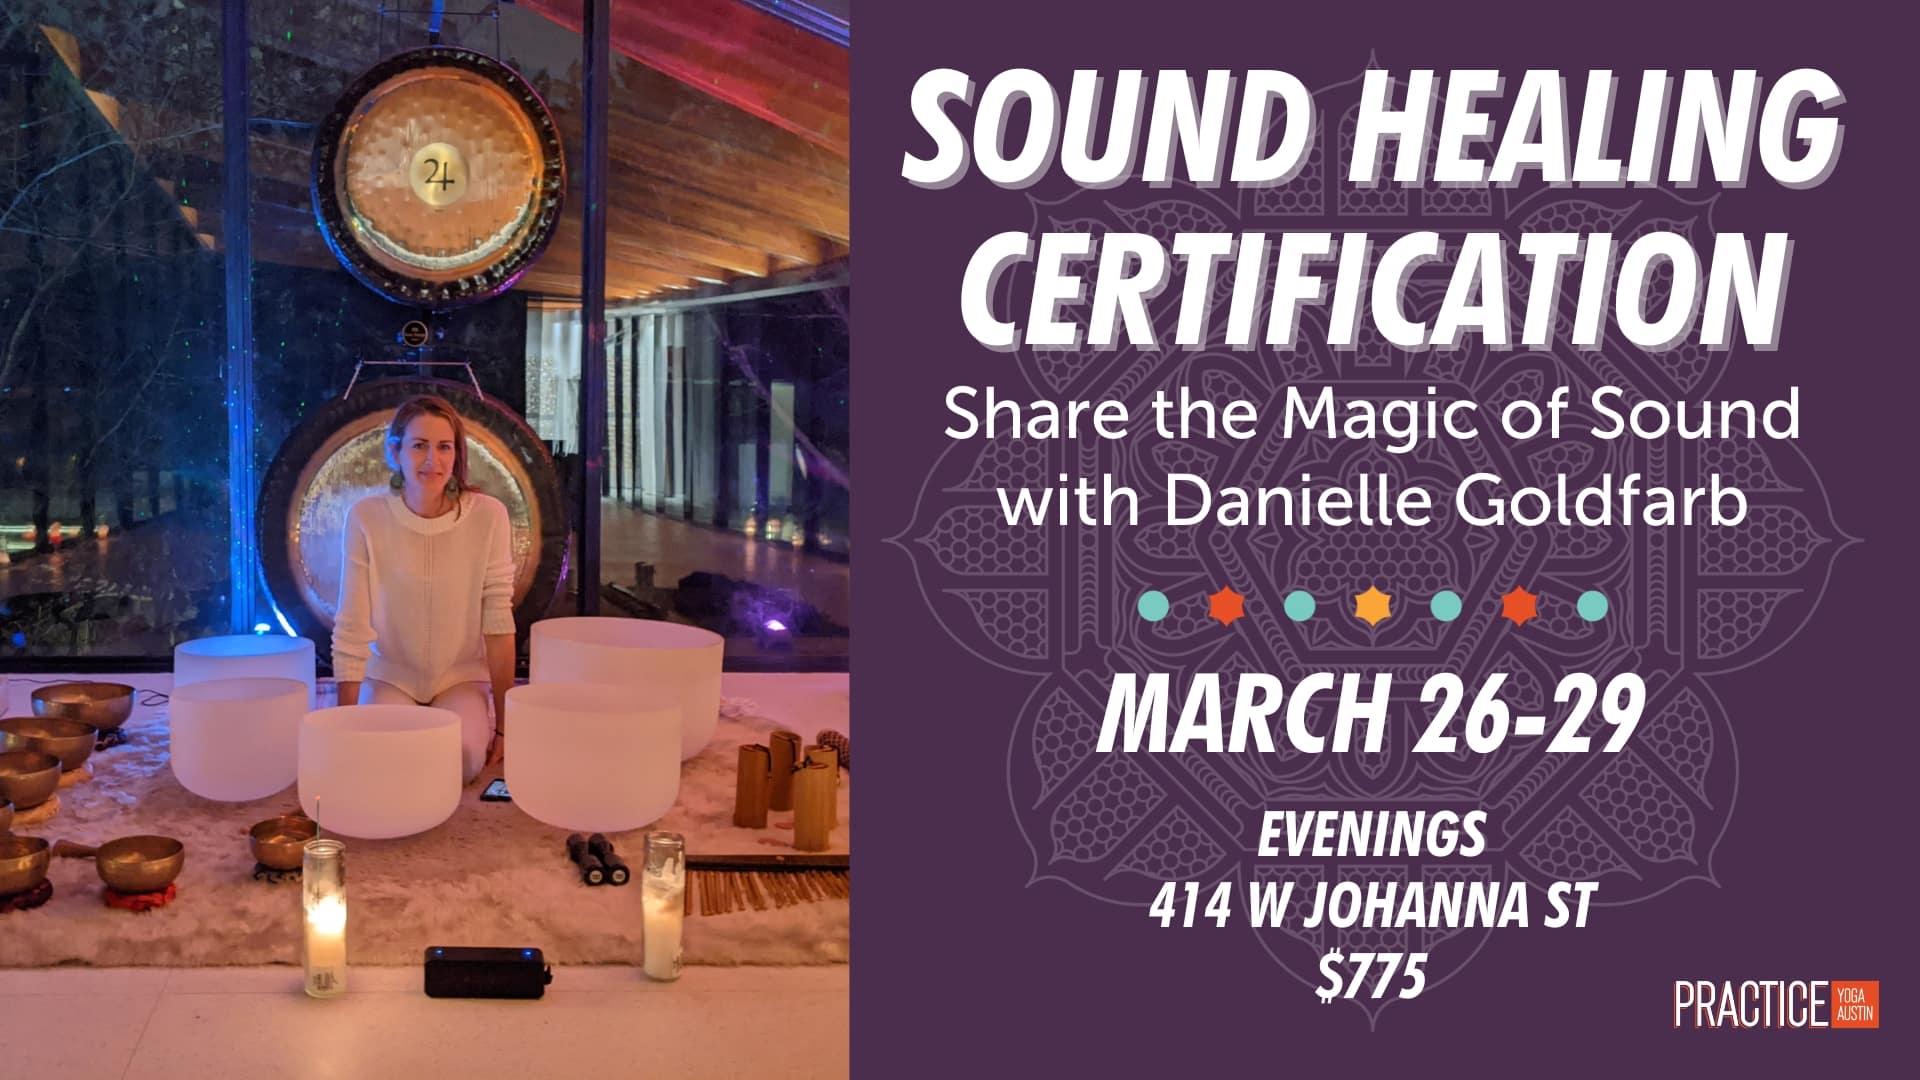 Sound Healing Certification with Danielle Goldfarb